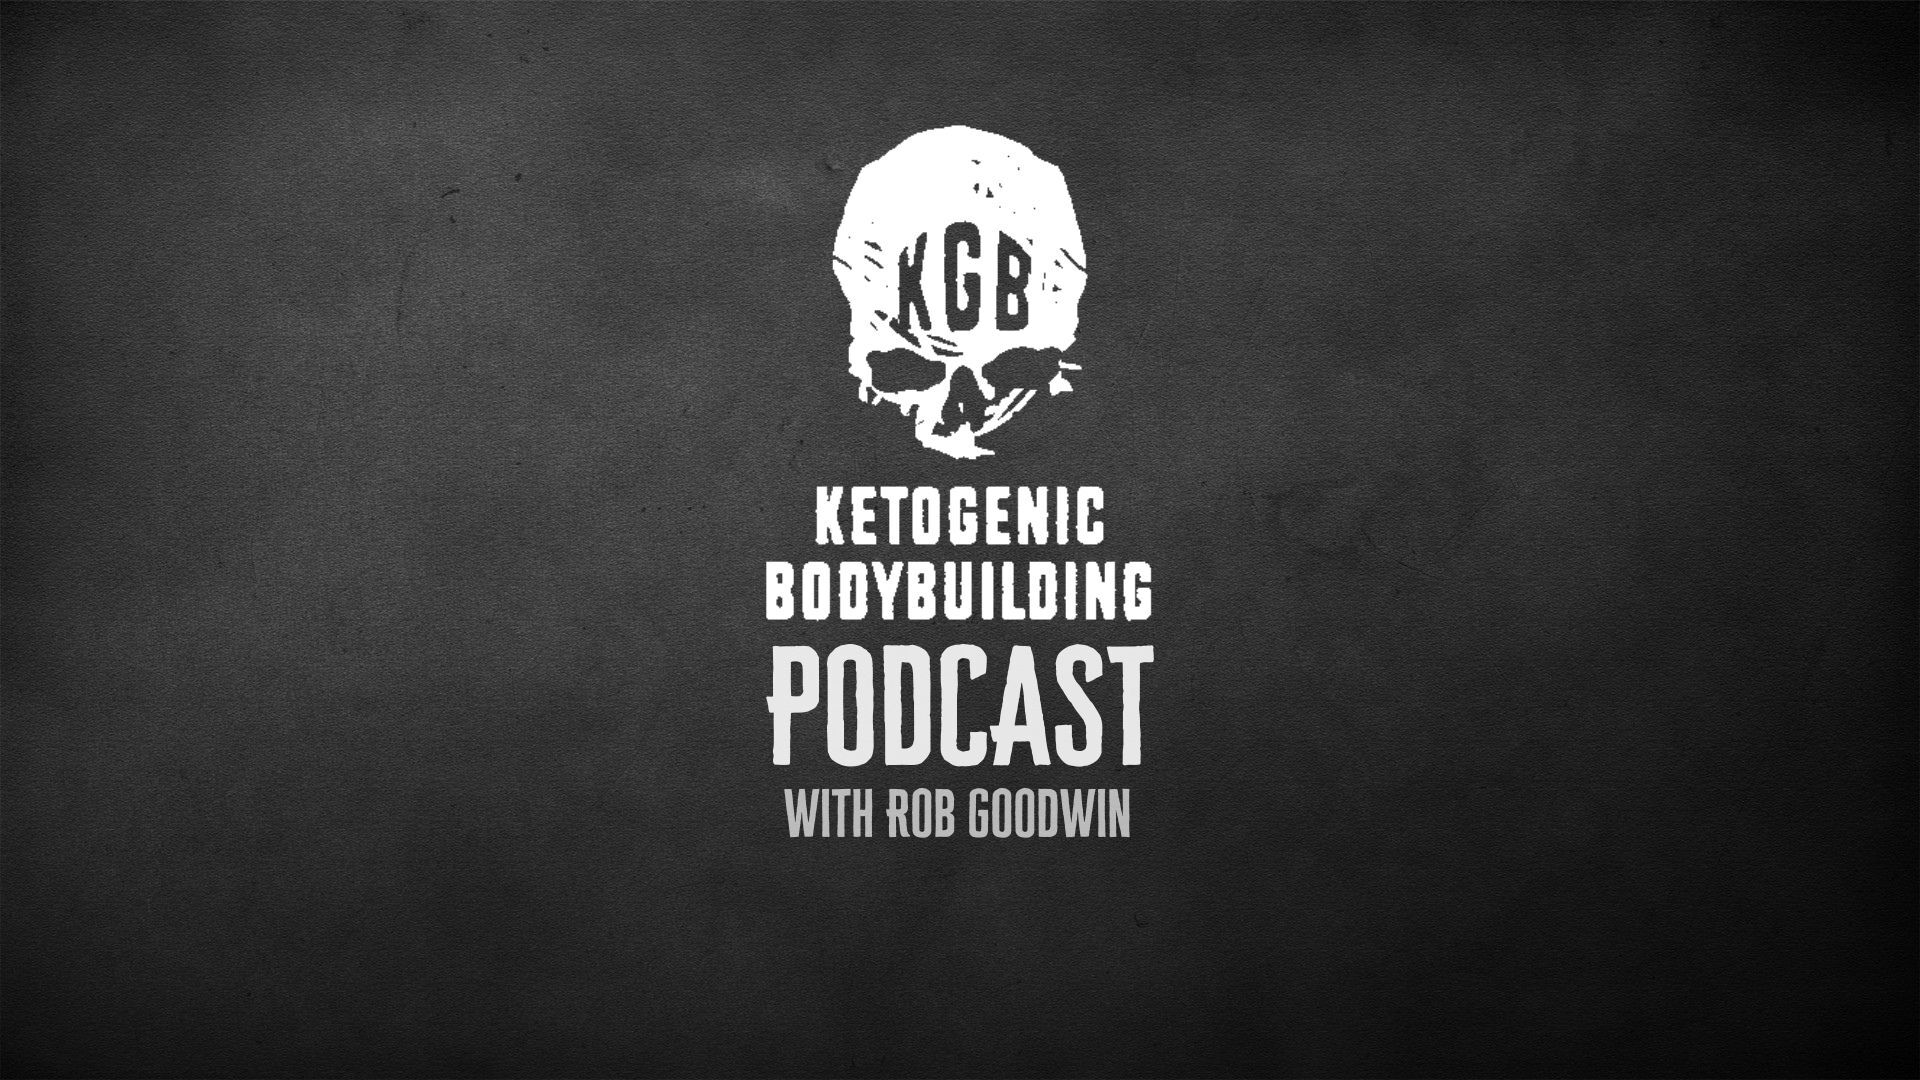 Ketogenic Bodybuilding Podcast with Rob Goodwin